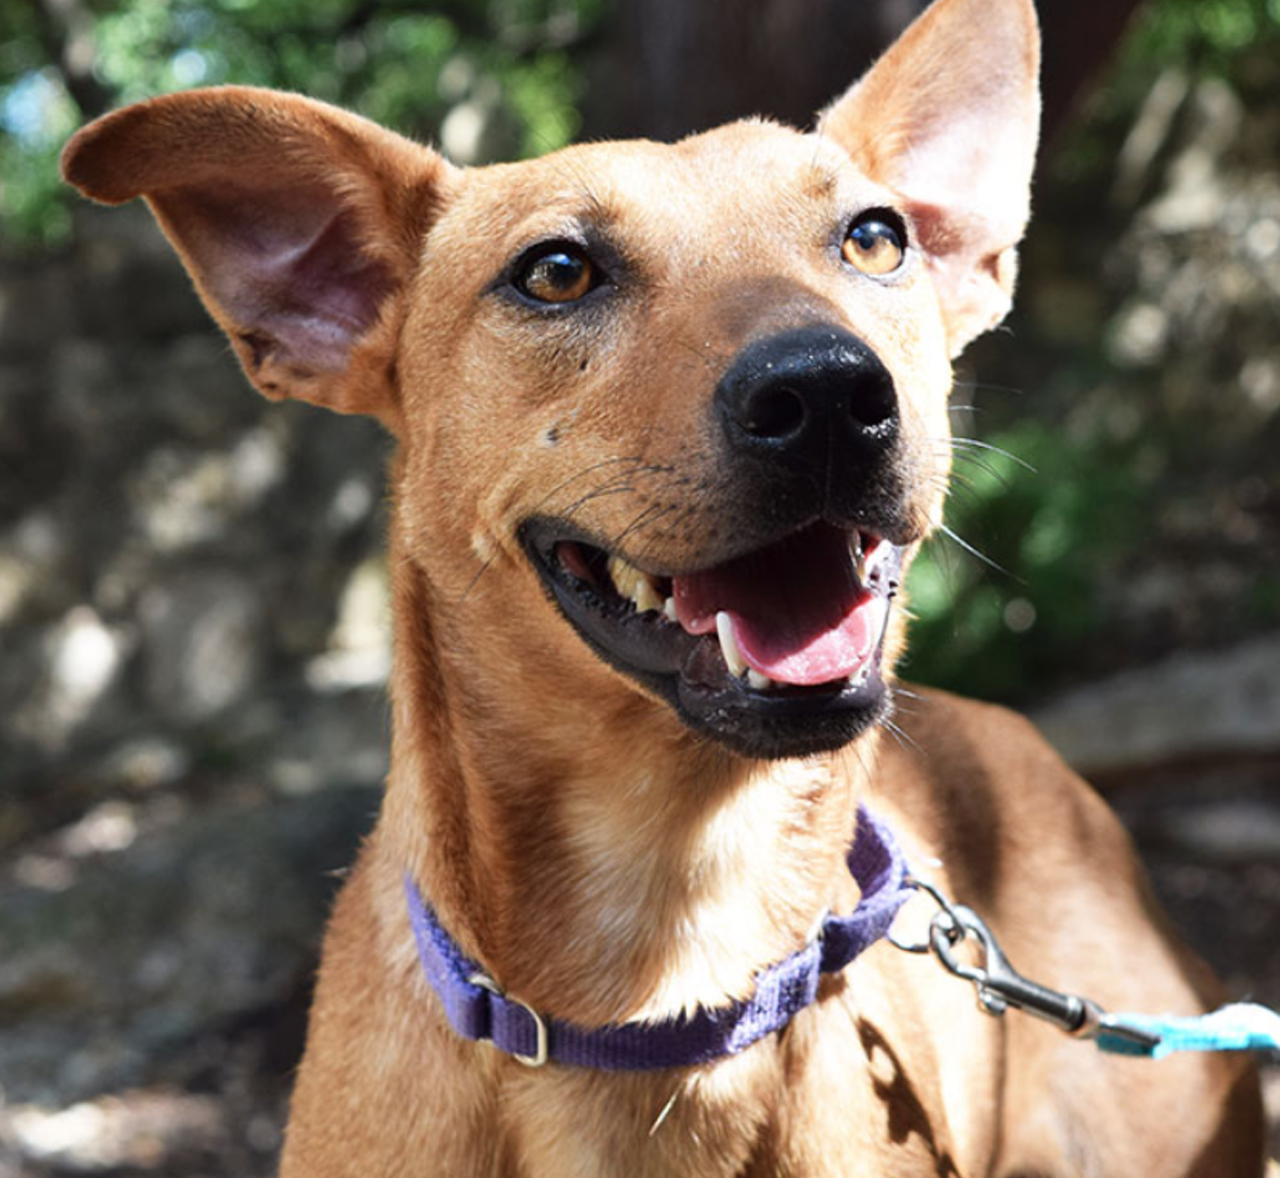 Roxanne
"Hi, I’m Roxanne! I’m a very sweet and affectionate young girl. I always want to be right by your side! I’m looking for a home that understands to go slow with me and I will show you all the love! I love to go on walks. Would you like to take me for one?"